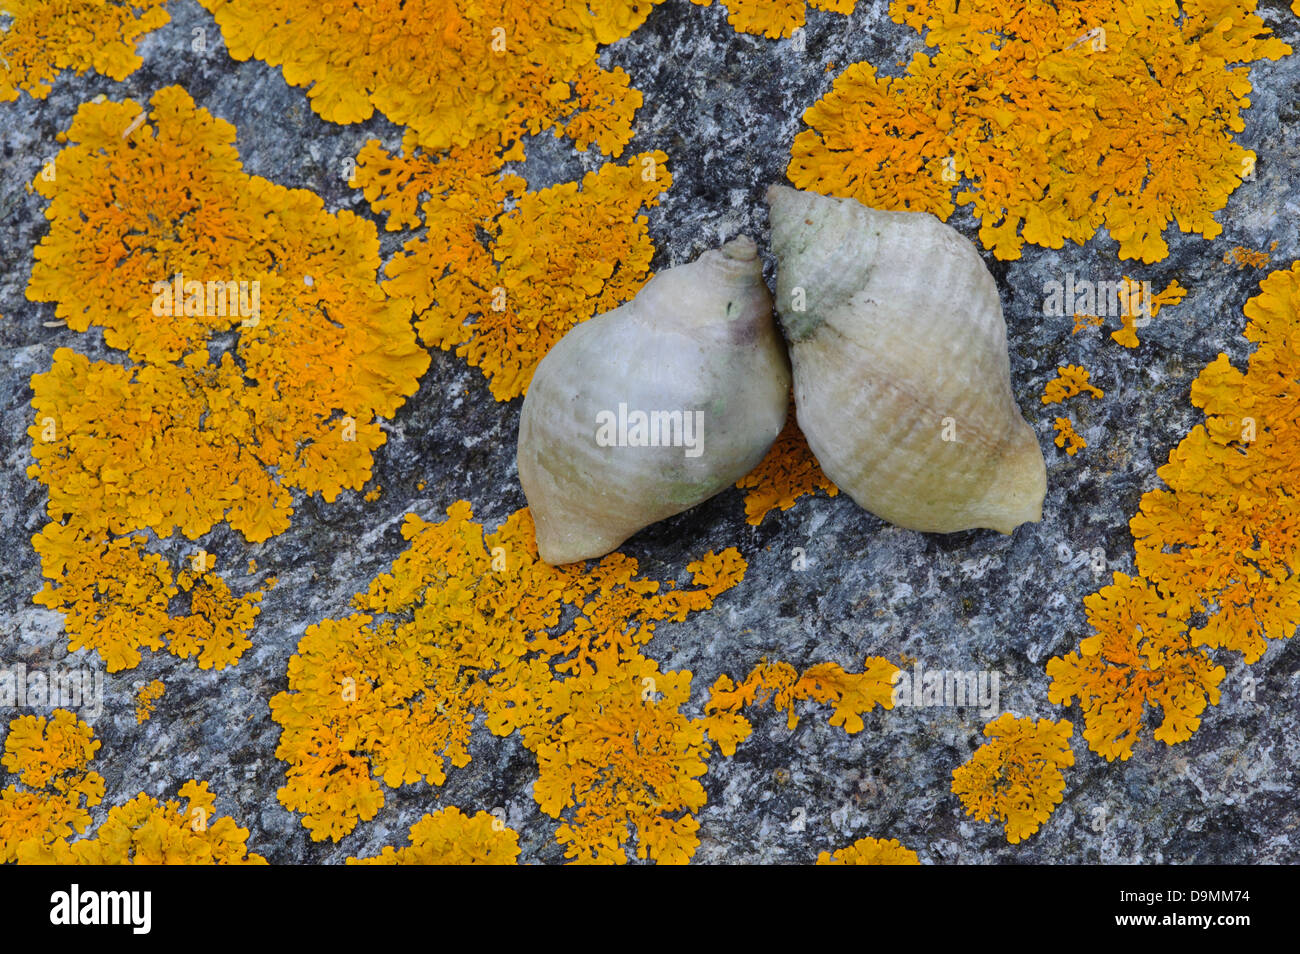 Horn-rimmed snails on lichens Stock Photo